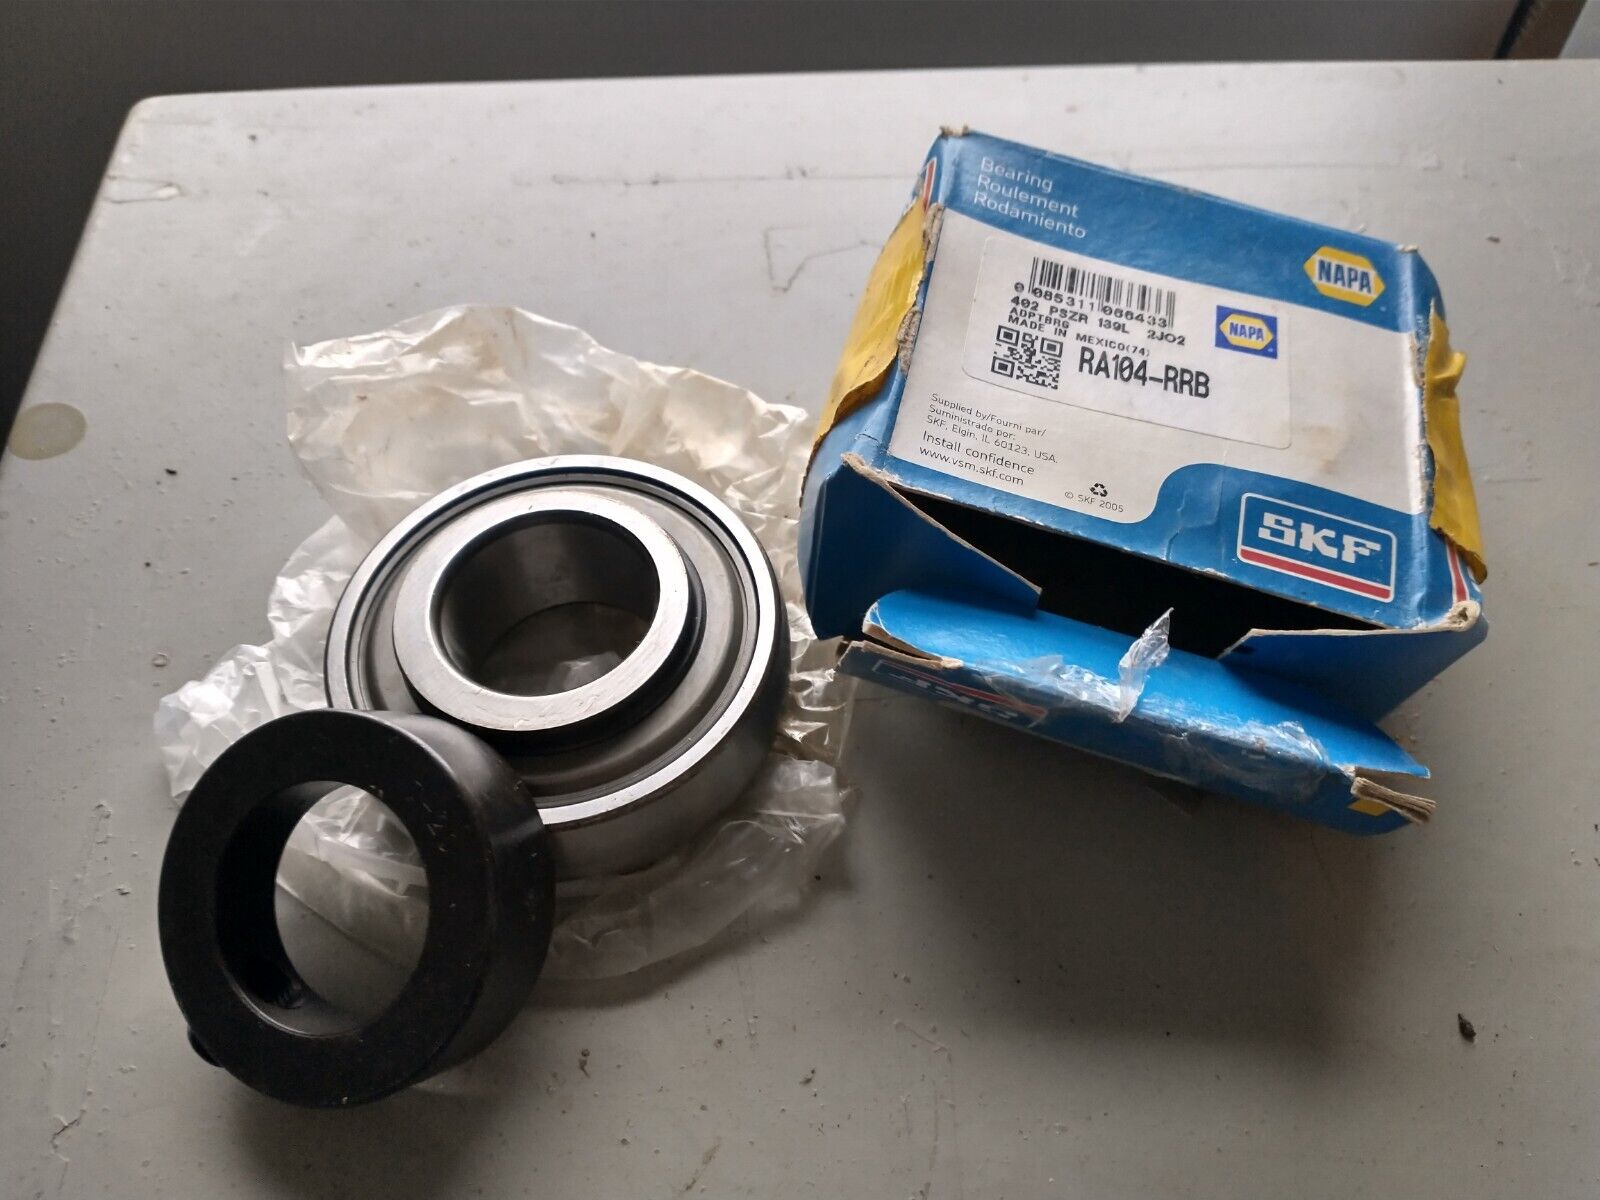 SKF YET 207-104 W Ball Bearing Insert with Lock Collar Old New Stock